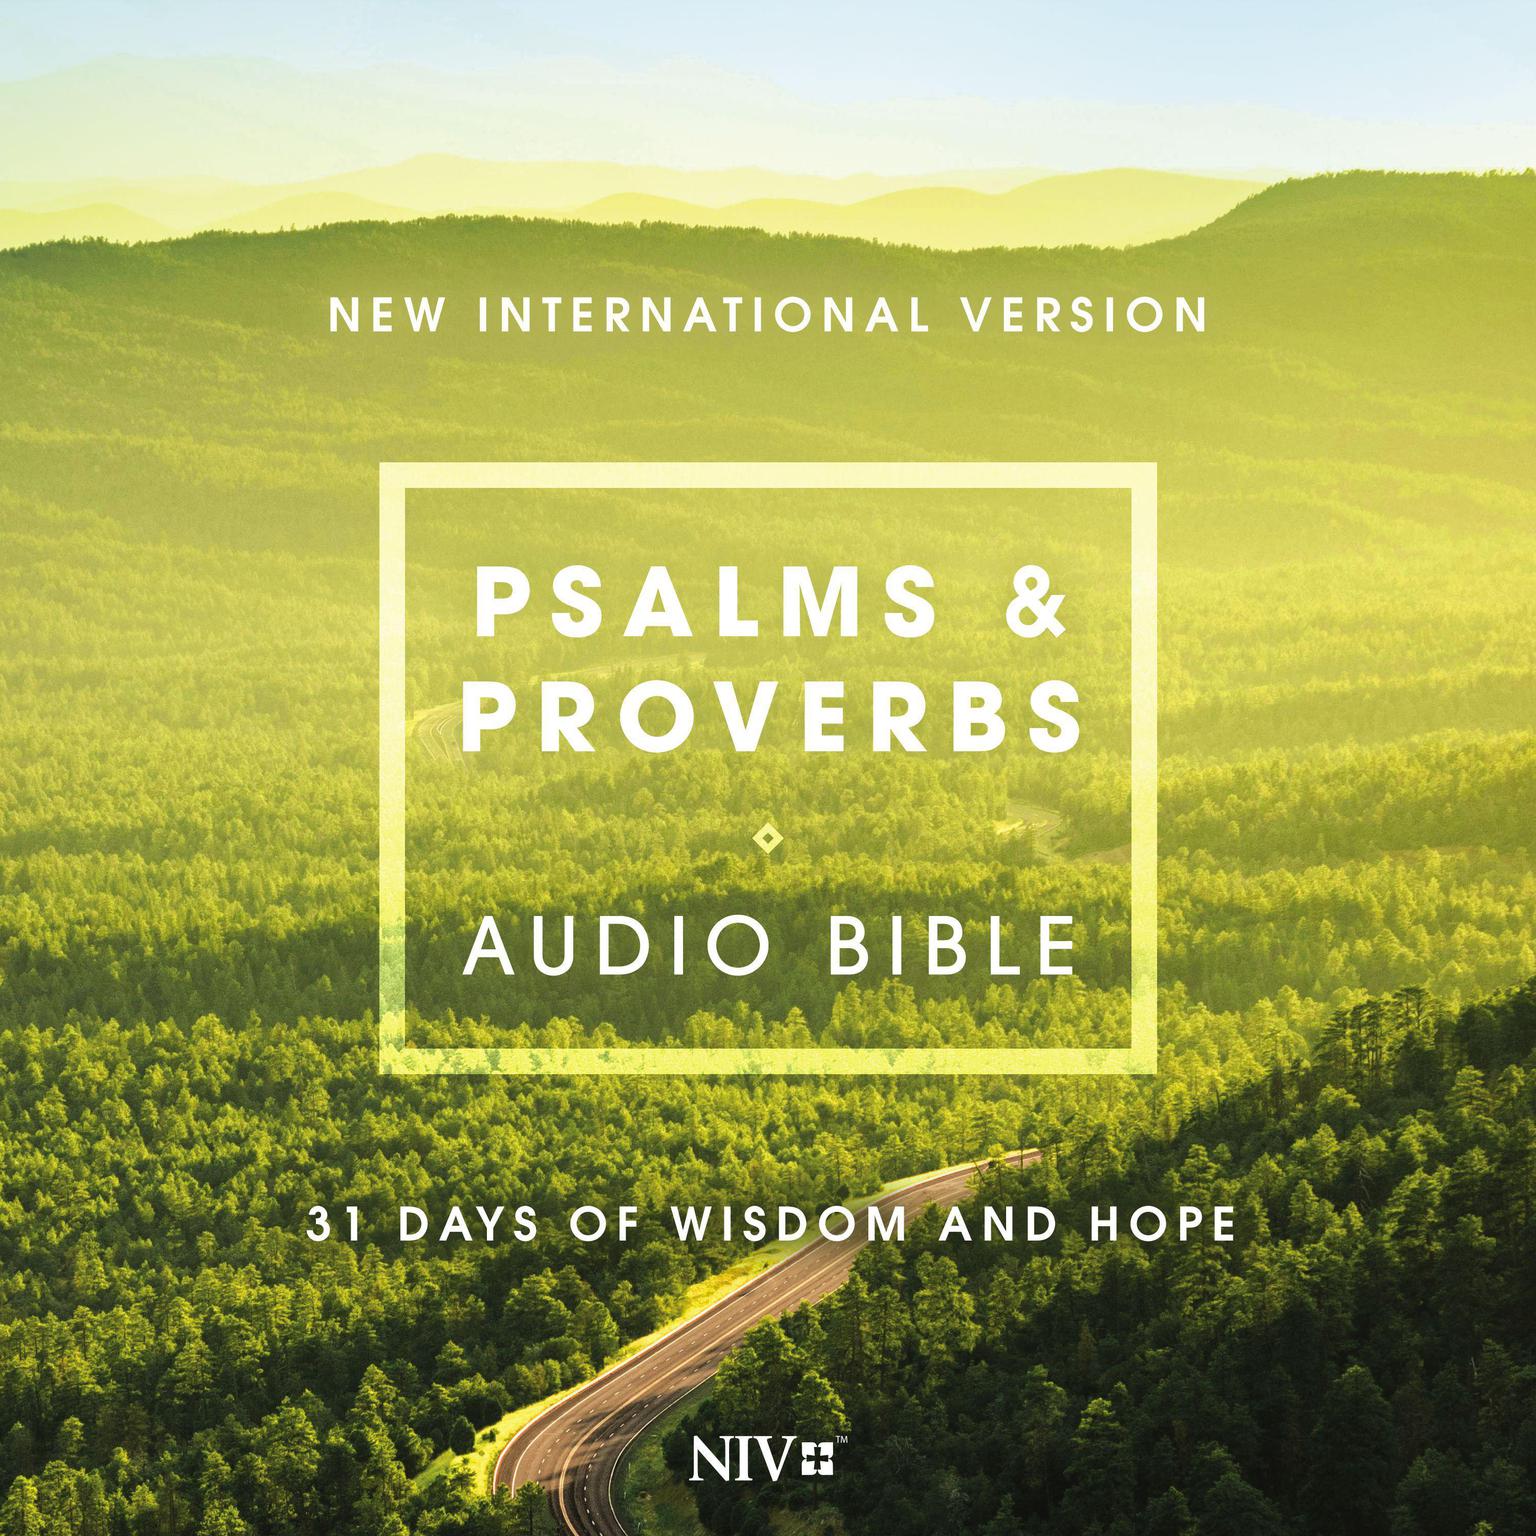 Psalms and Proverbs Audio Bible - New International Version, NIV: 31 Days of Wisdom and Hope Audiobook, by Zondervan